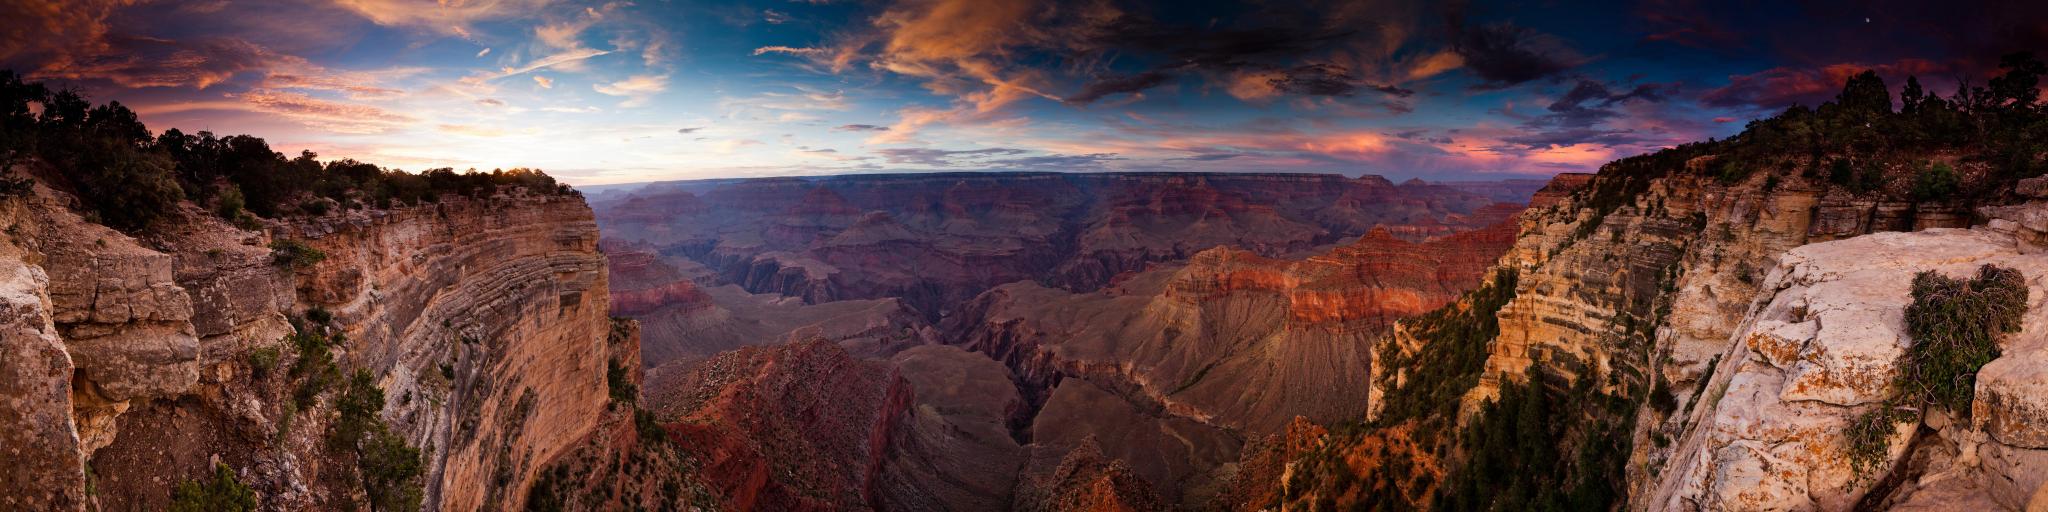 A fantastic view of the sunset reflecting the walls of Grand Canyon with a beautiful hue of pink and purple clouds in the blue sky 